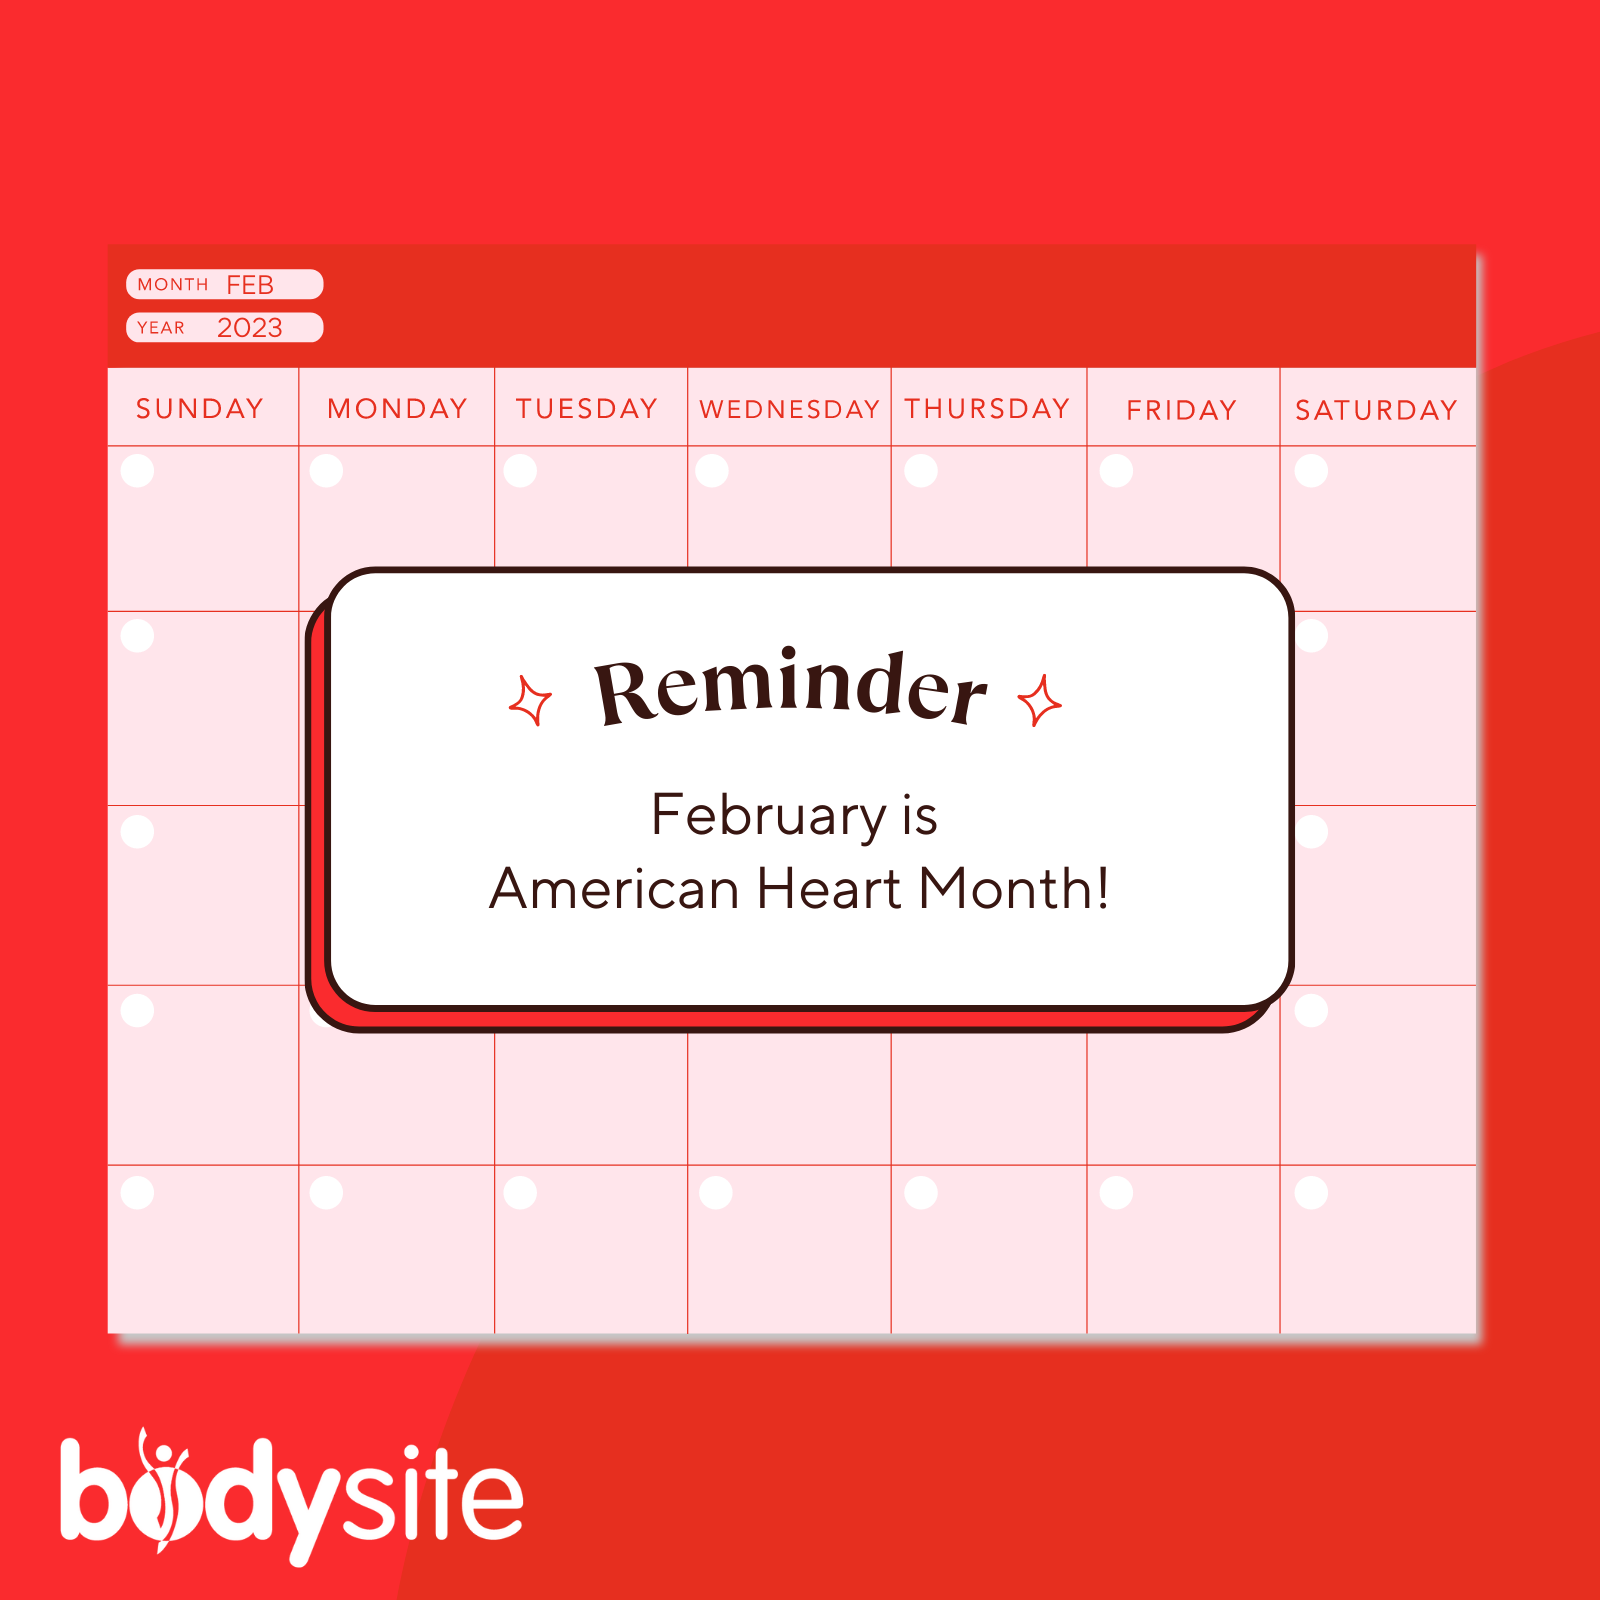 https://bodysite.com/wp-content/uploads/2023/02/february-is-american-heart-month-bodysite.png